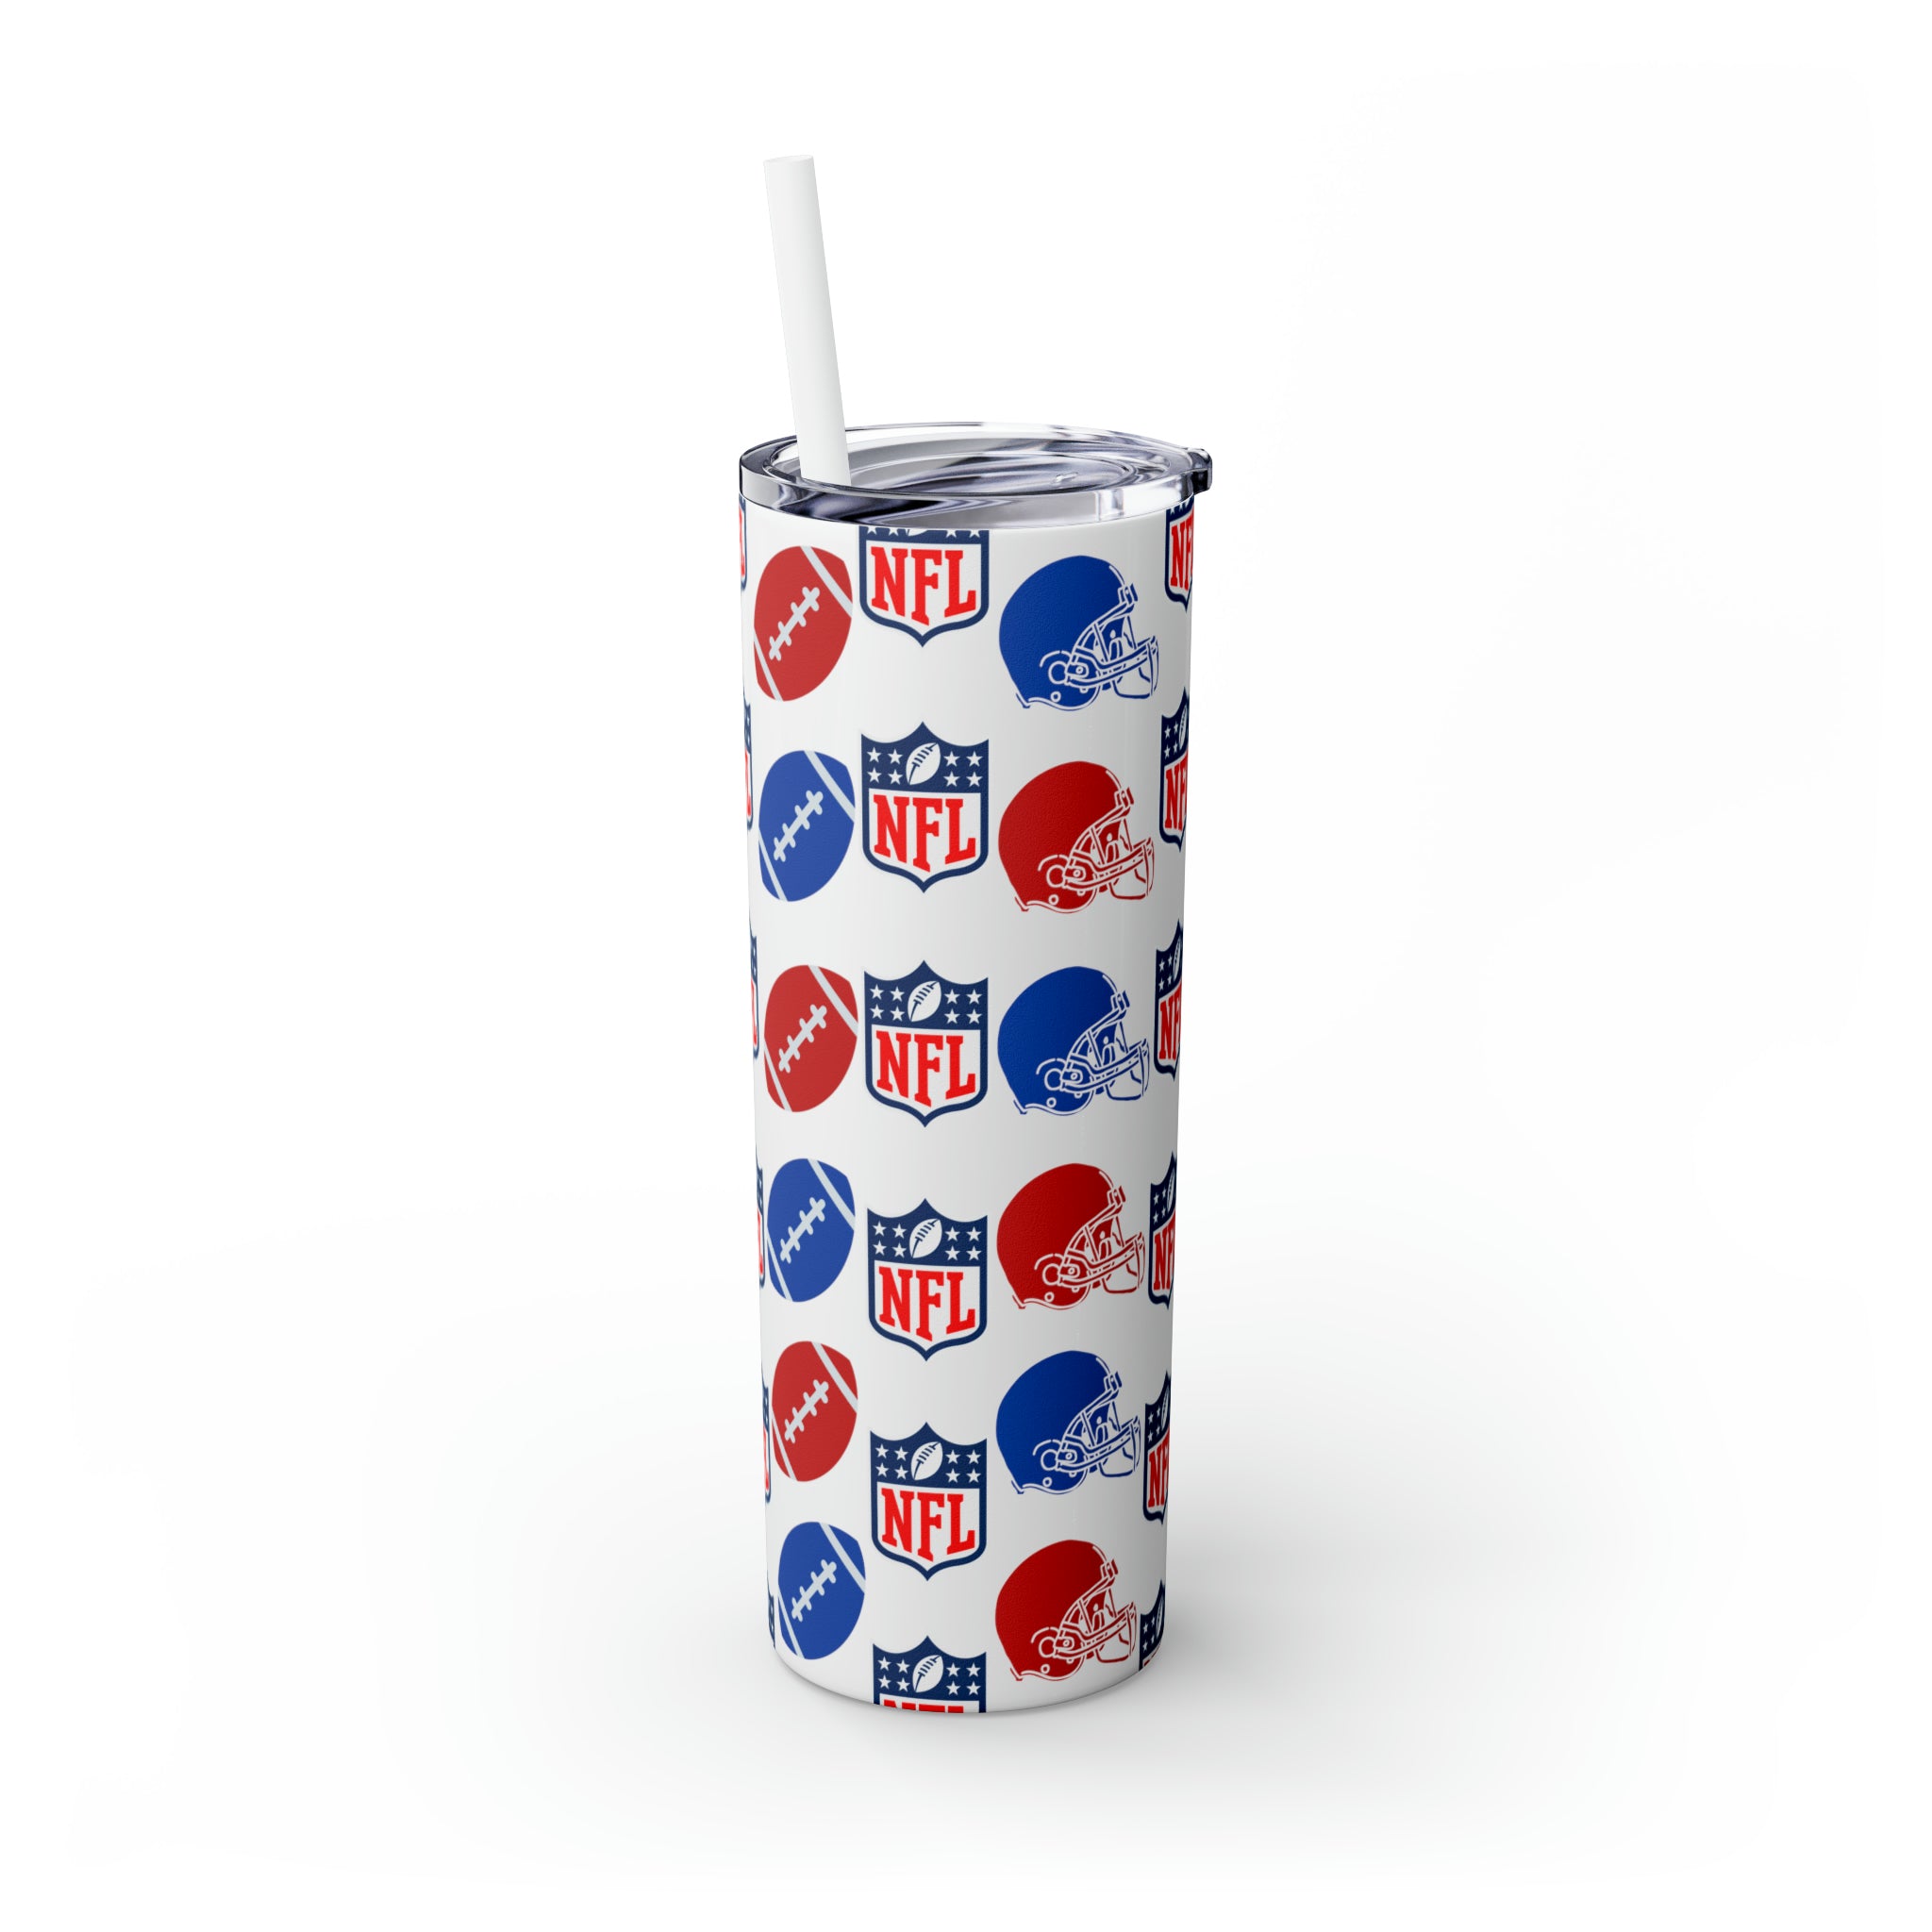 The National Football League NFL Tumbler with Straw v4